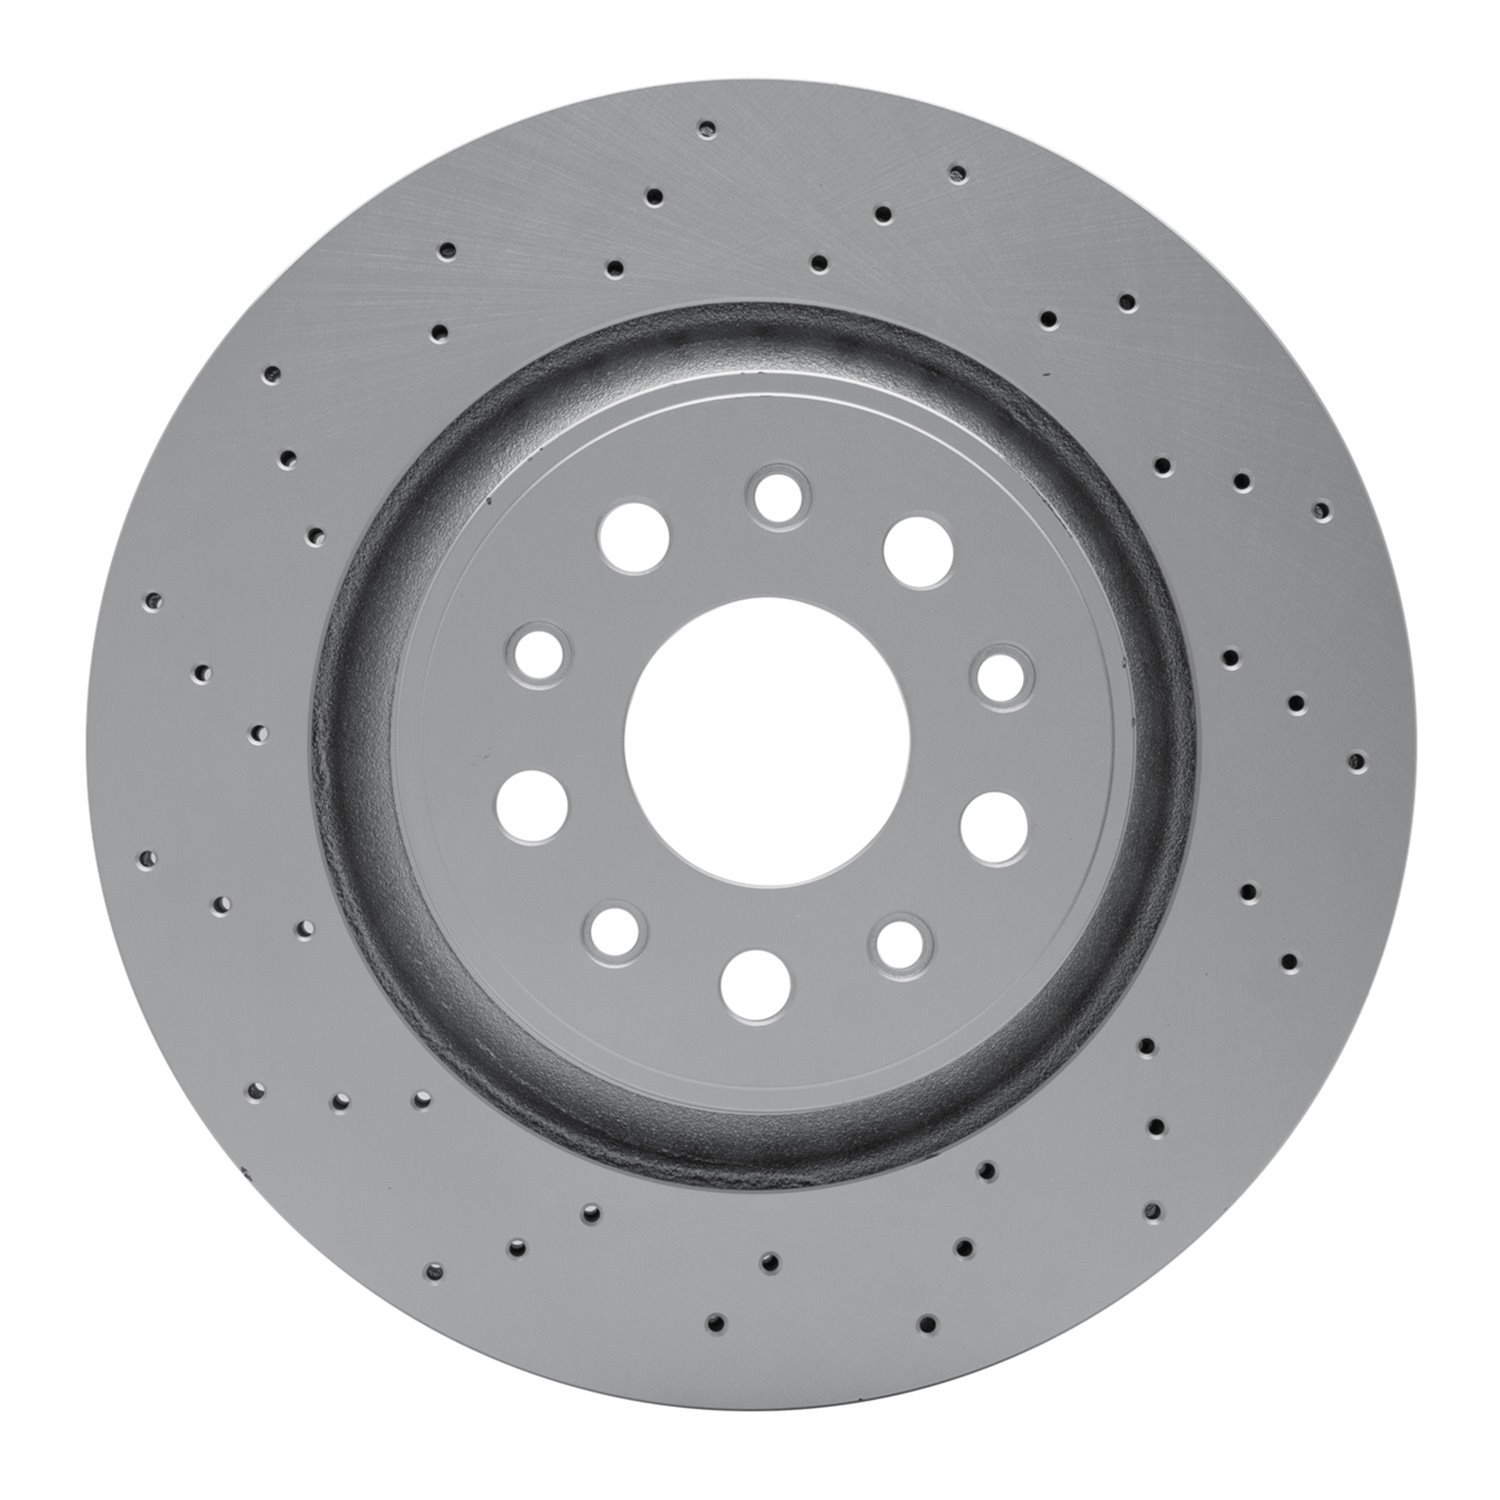 Hi-Carbon Alloy Geomet-Coated Drilled Rotor, 2017-2020 Maserati, Position: Rear